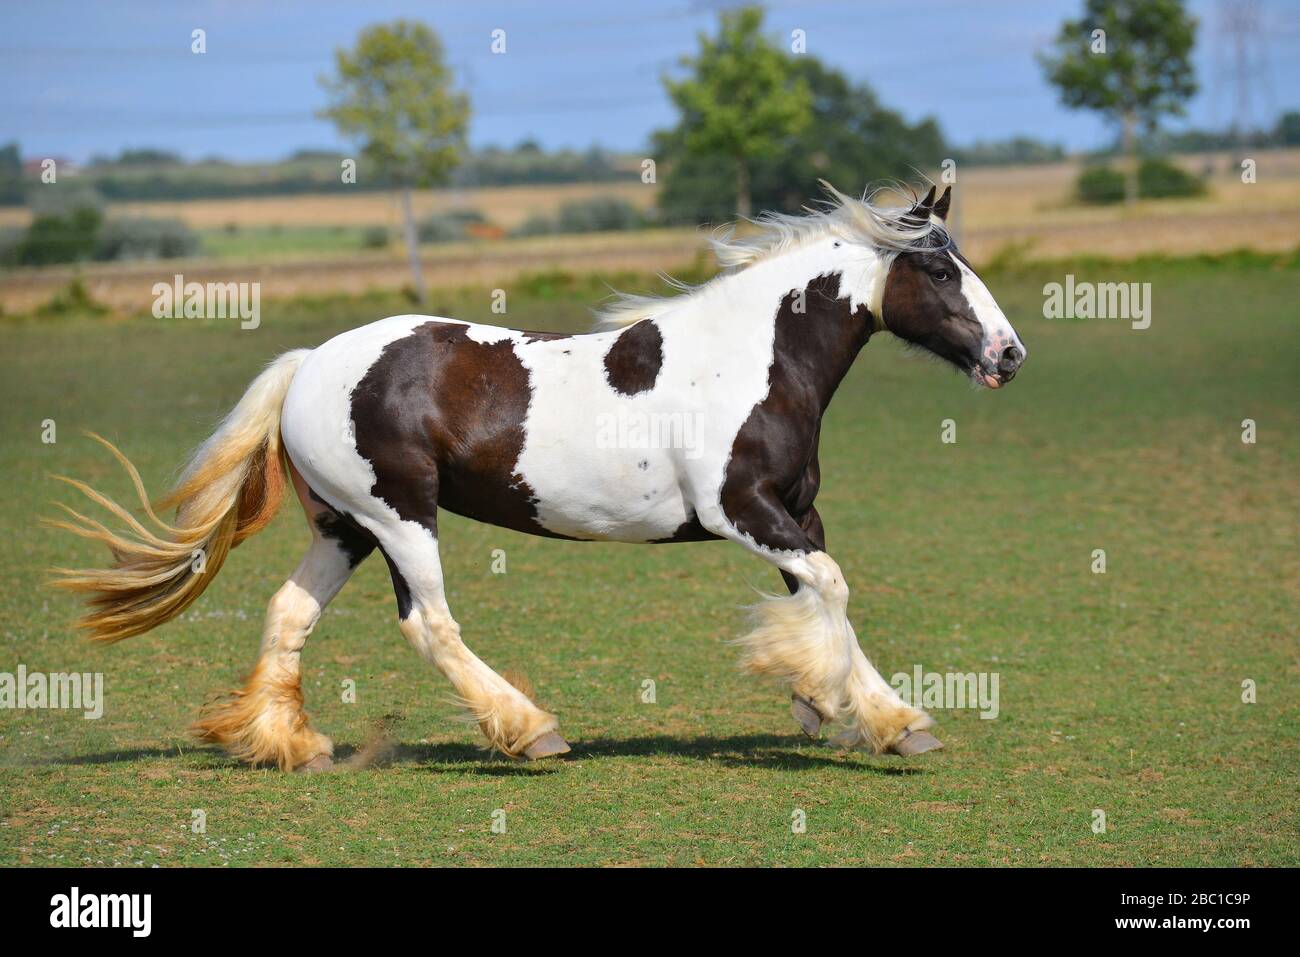 Pinto Irish cob horse running in gallop over the field. Horizontal, side view, in motion. Stock Photo